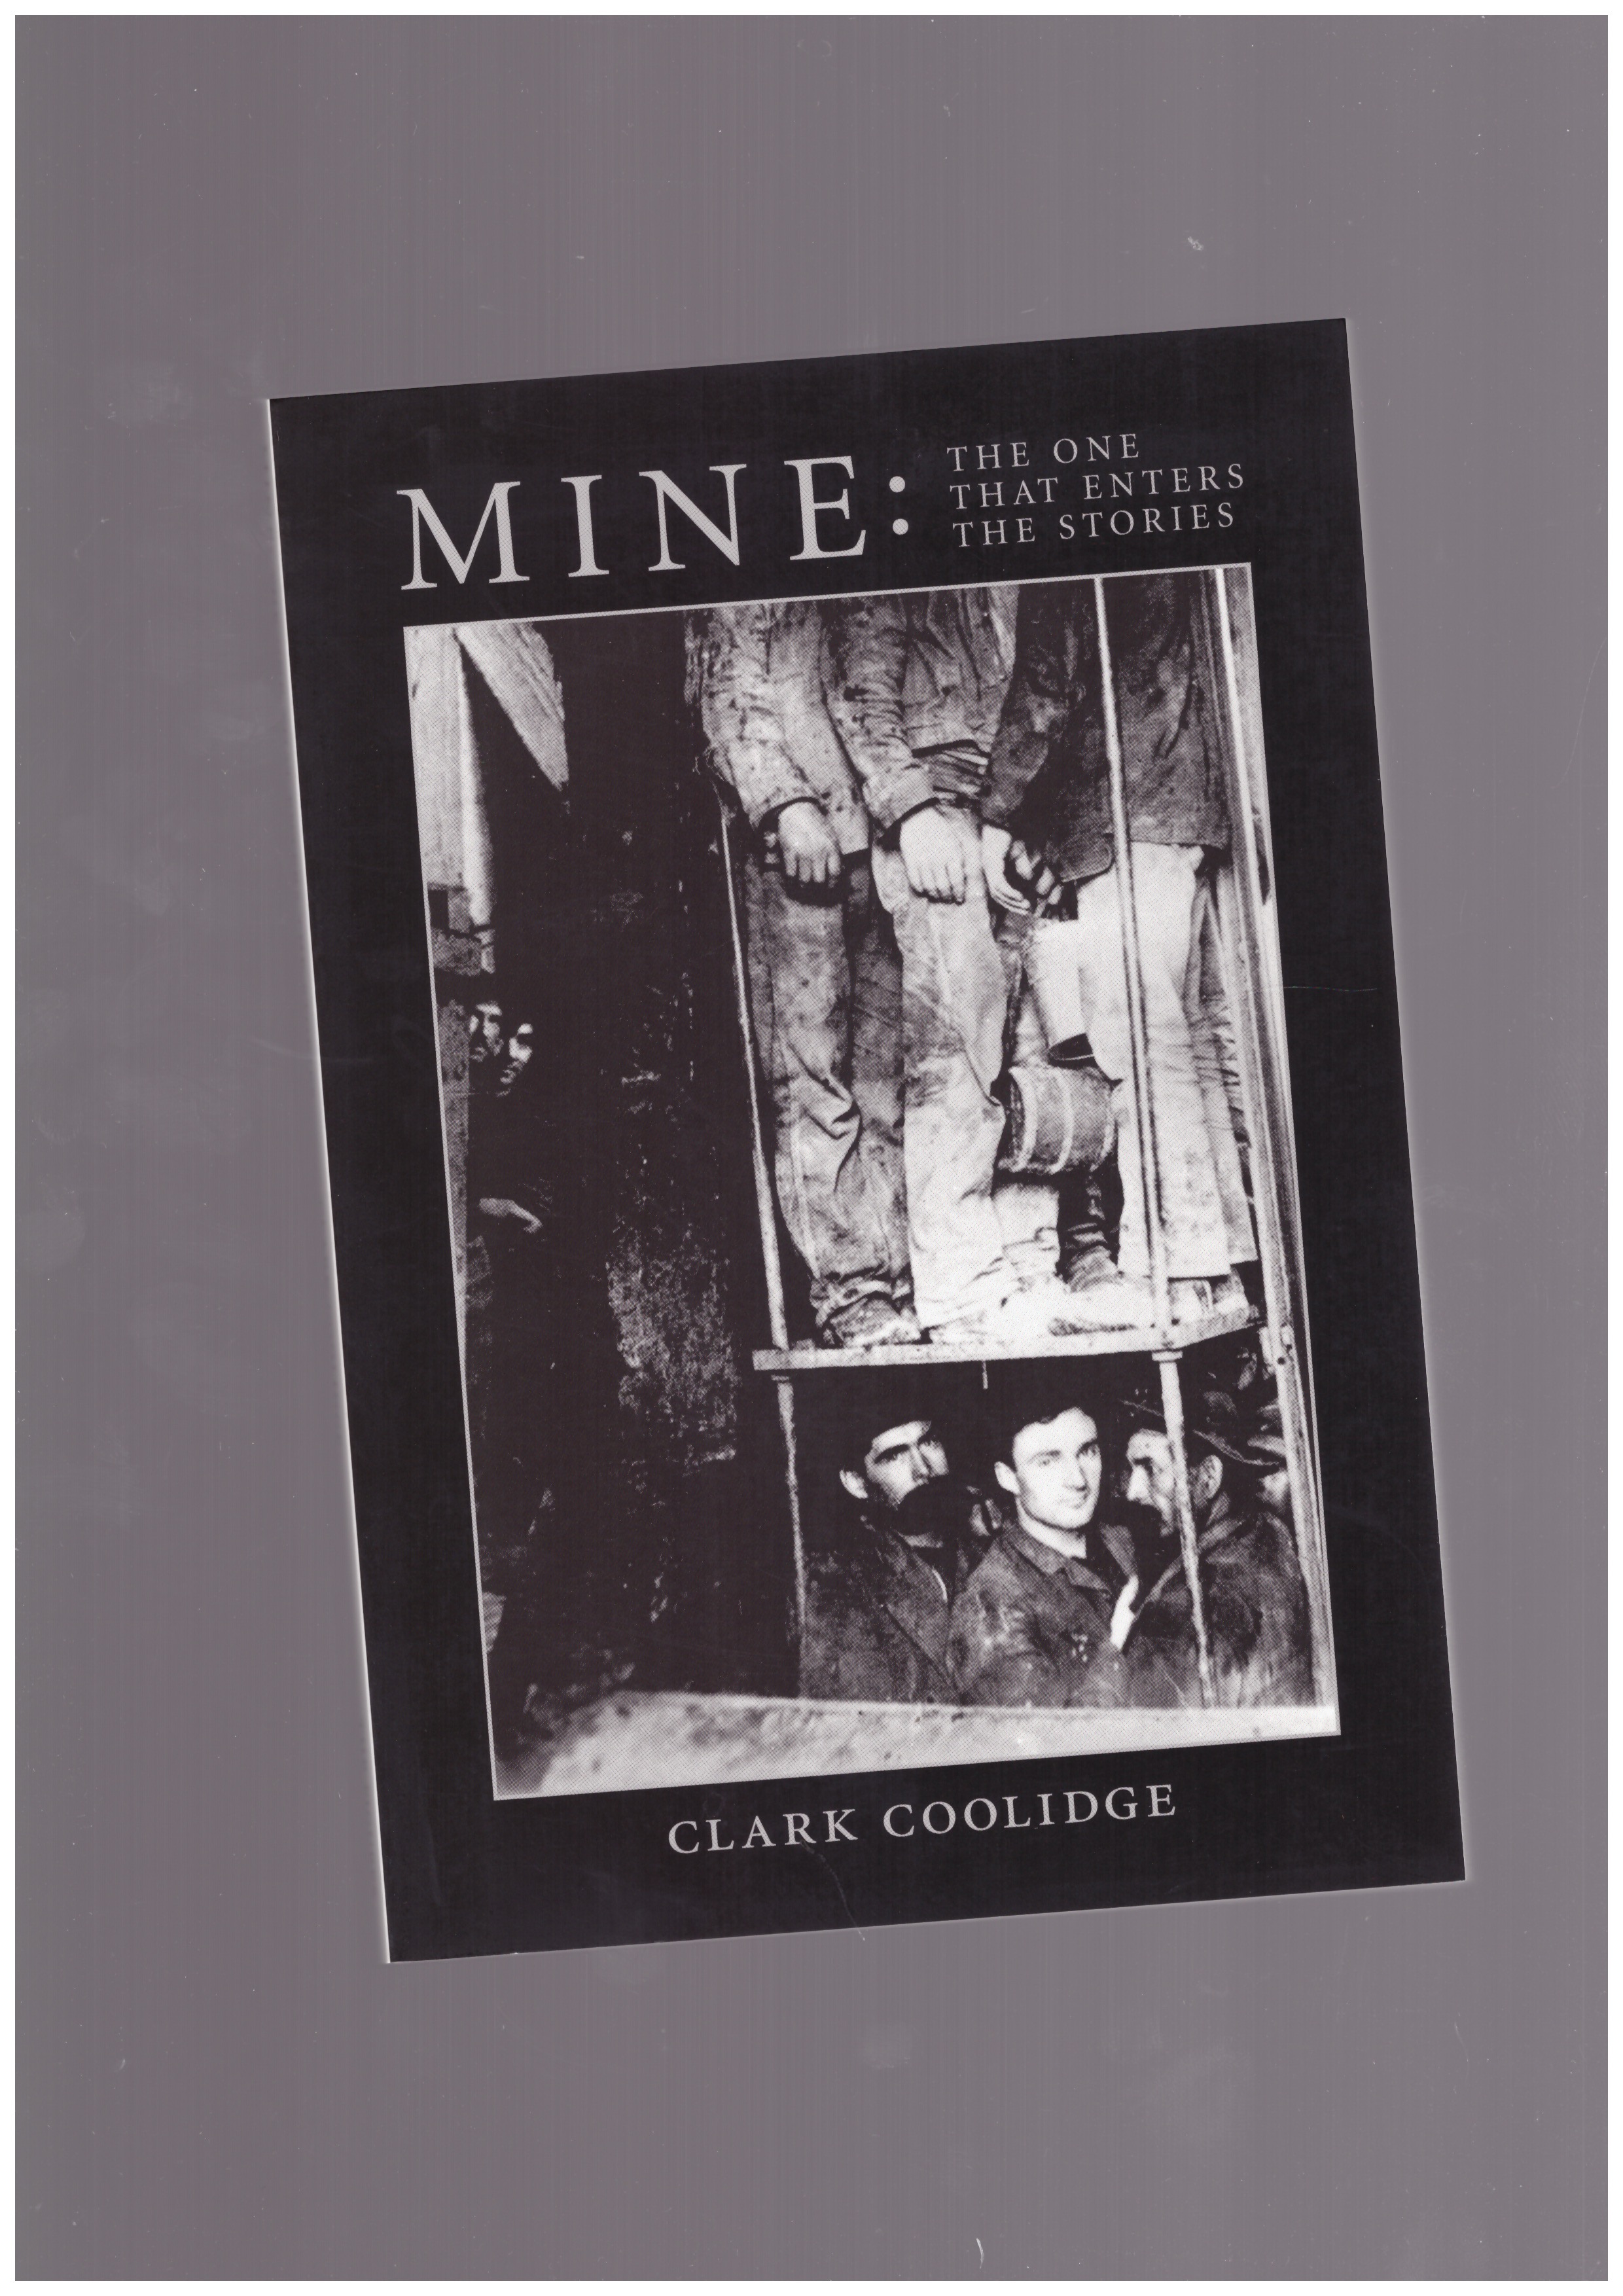 COOLIDGE, Clark - Mine: The One That Enters the Stories